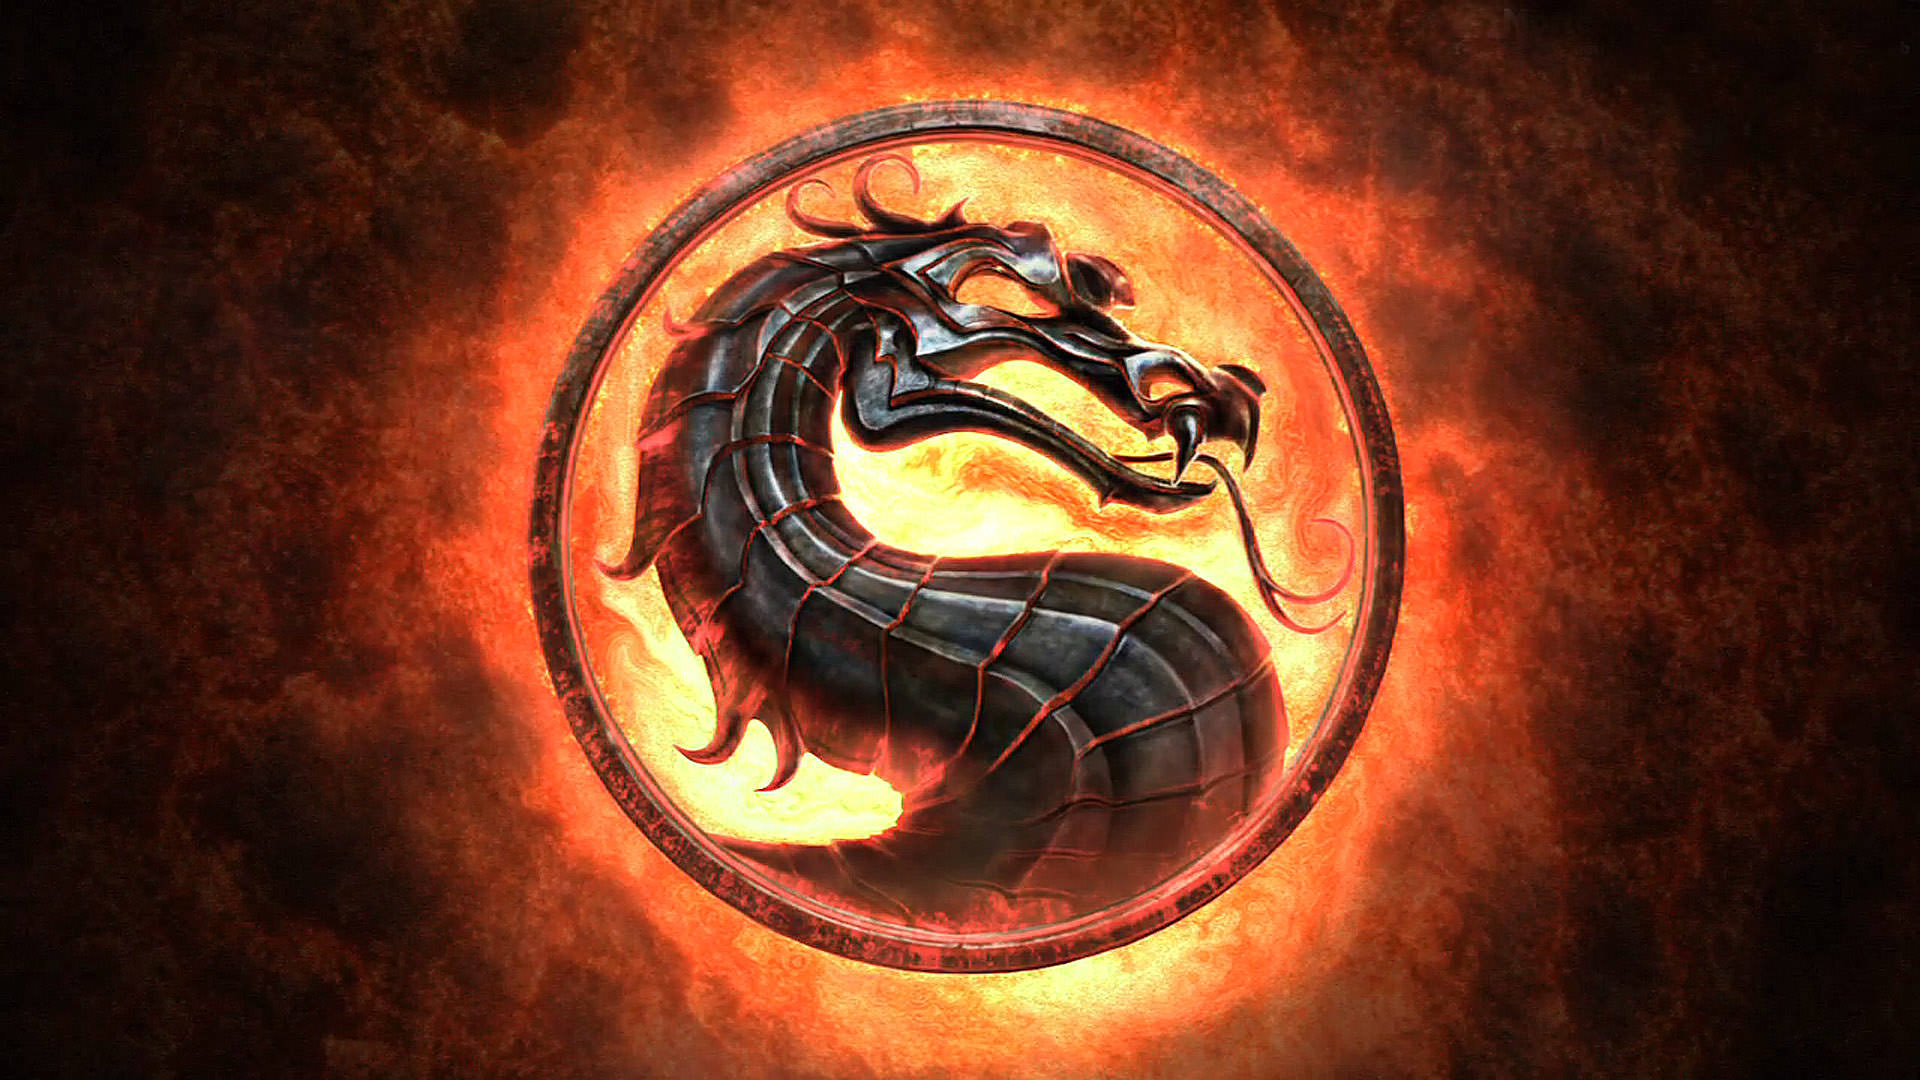 Mortal Kombat is Getting Rebooted – Which Celeb Should Play Who?